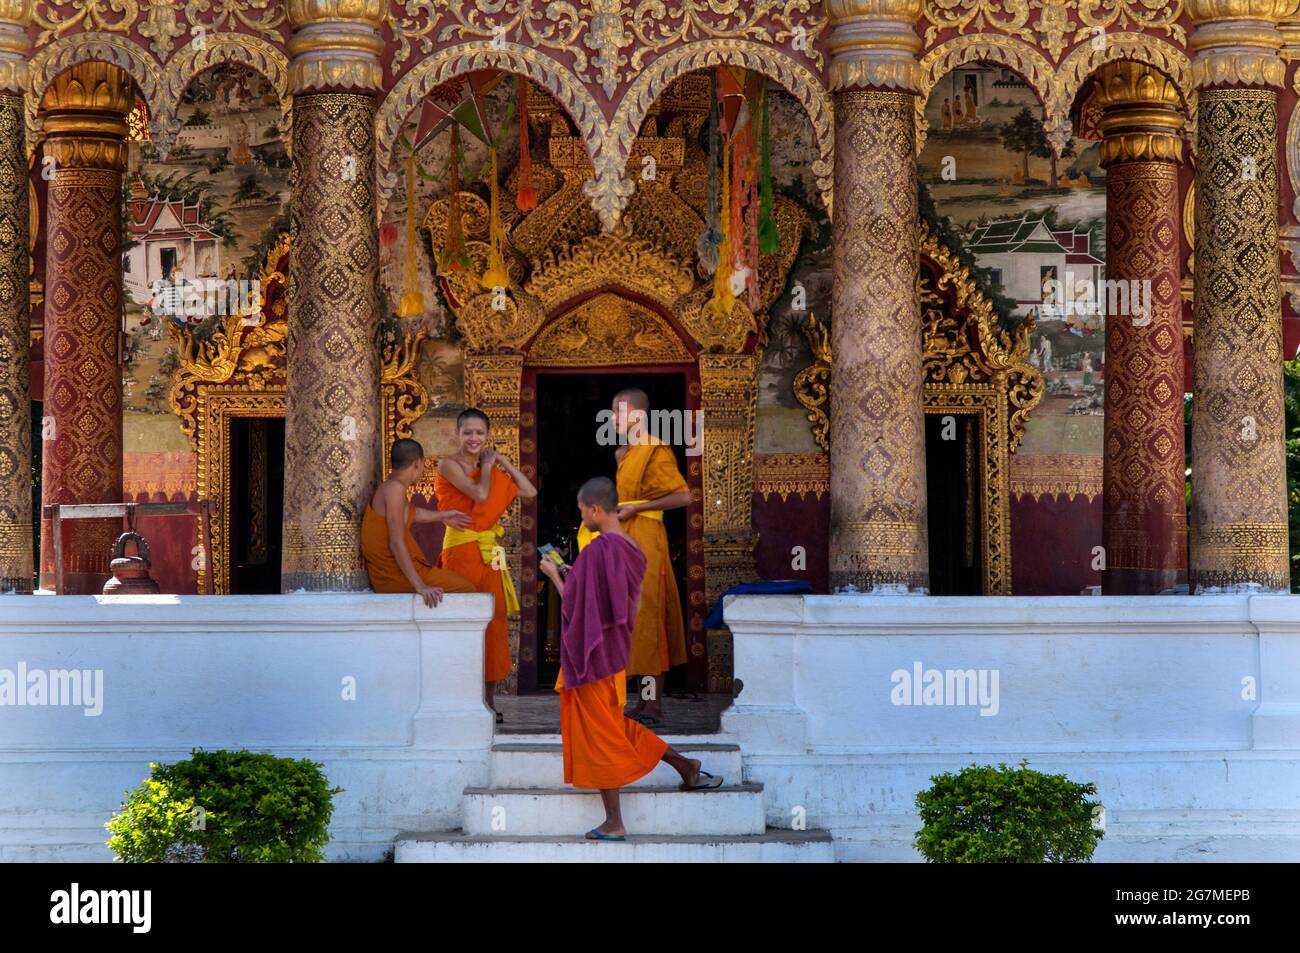 Luang Prabang. Novice Buddhist monks come to lodge in the town's temples whilst learning the life of a monk, such as here at Wat Paphai In the late 18 Stock Photo